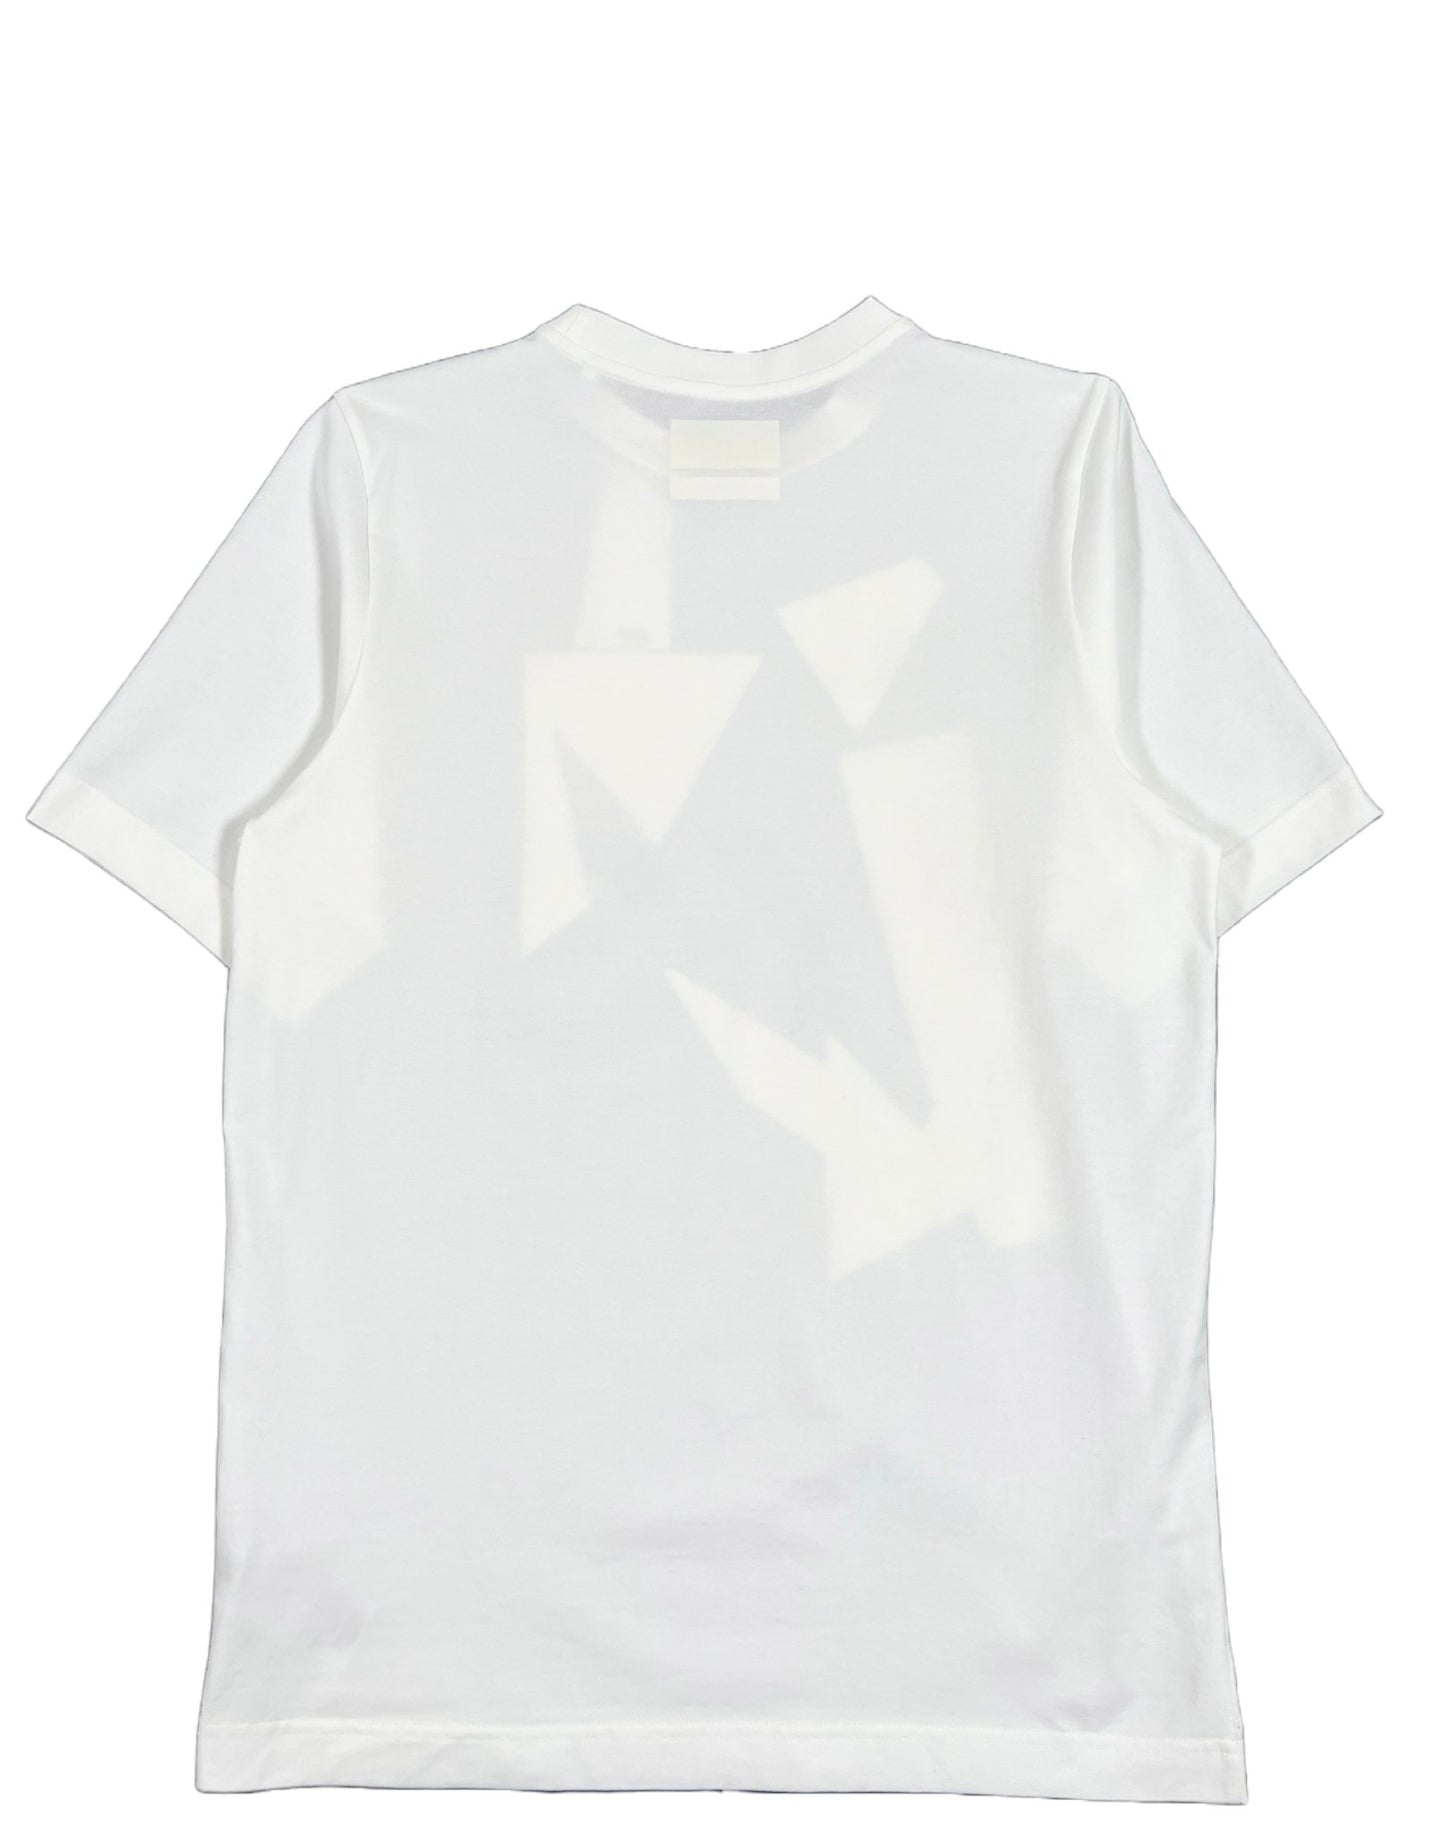 A ADIDAS x Y-3 T-SHIRT IL1790 GRAPHIC SS CORE WHITE/MULTICOLOR with a graphic logo triangle on the front.